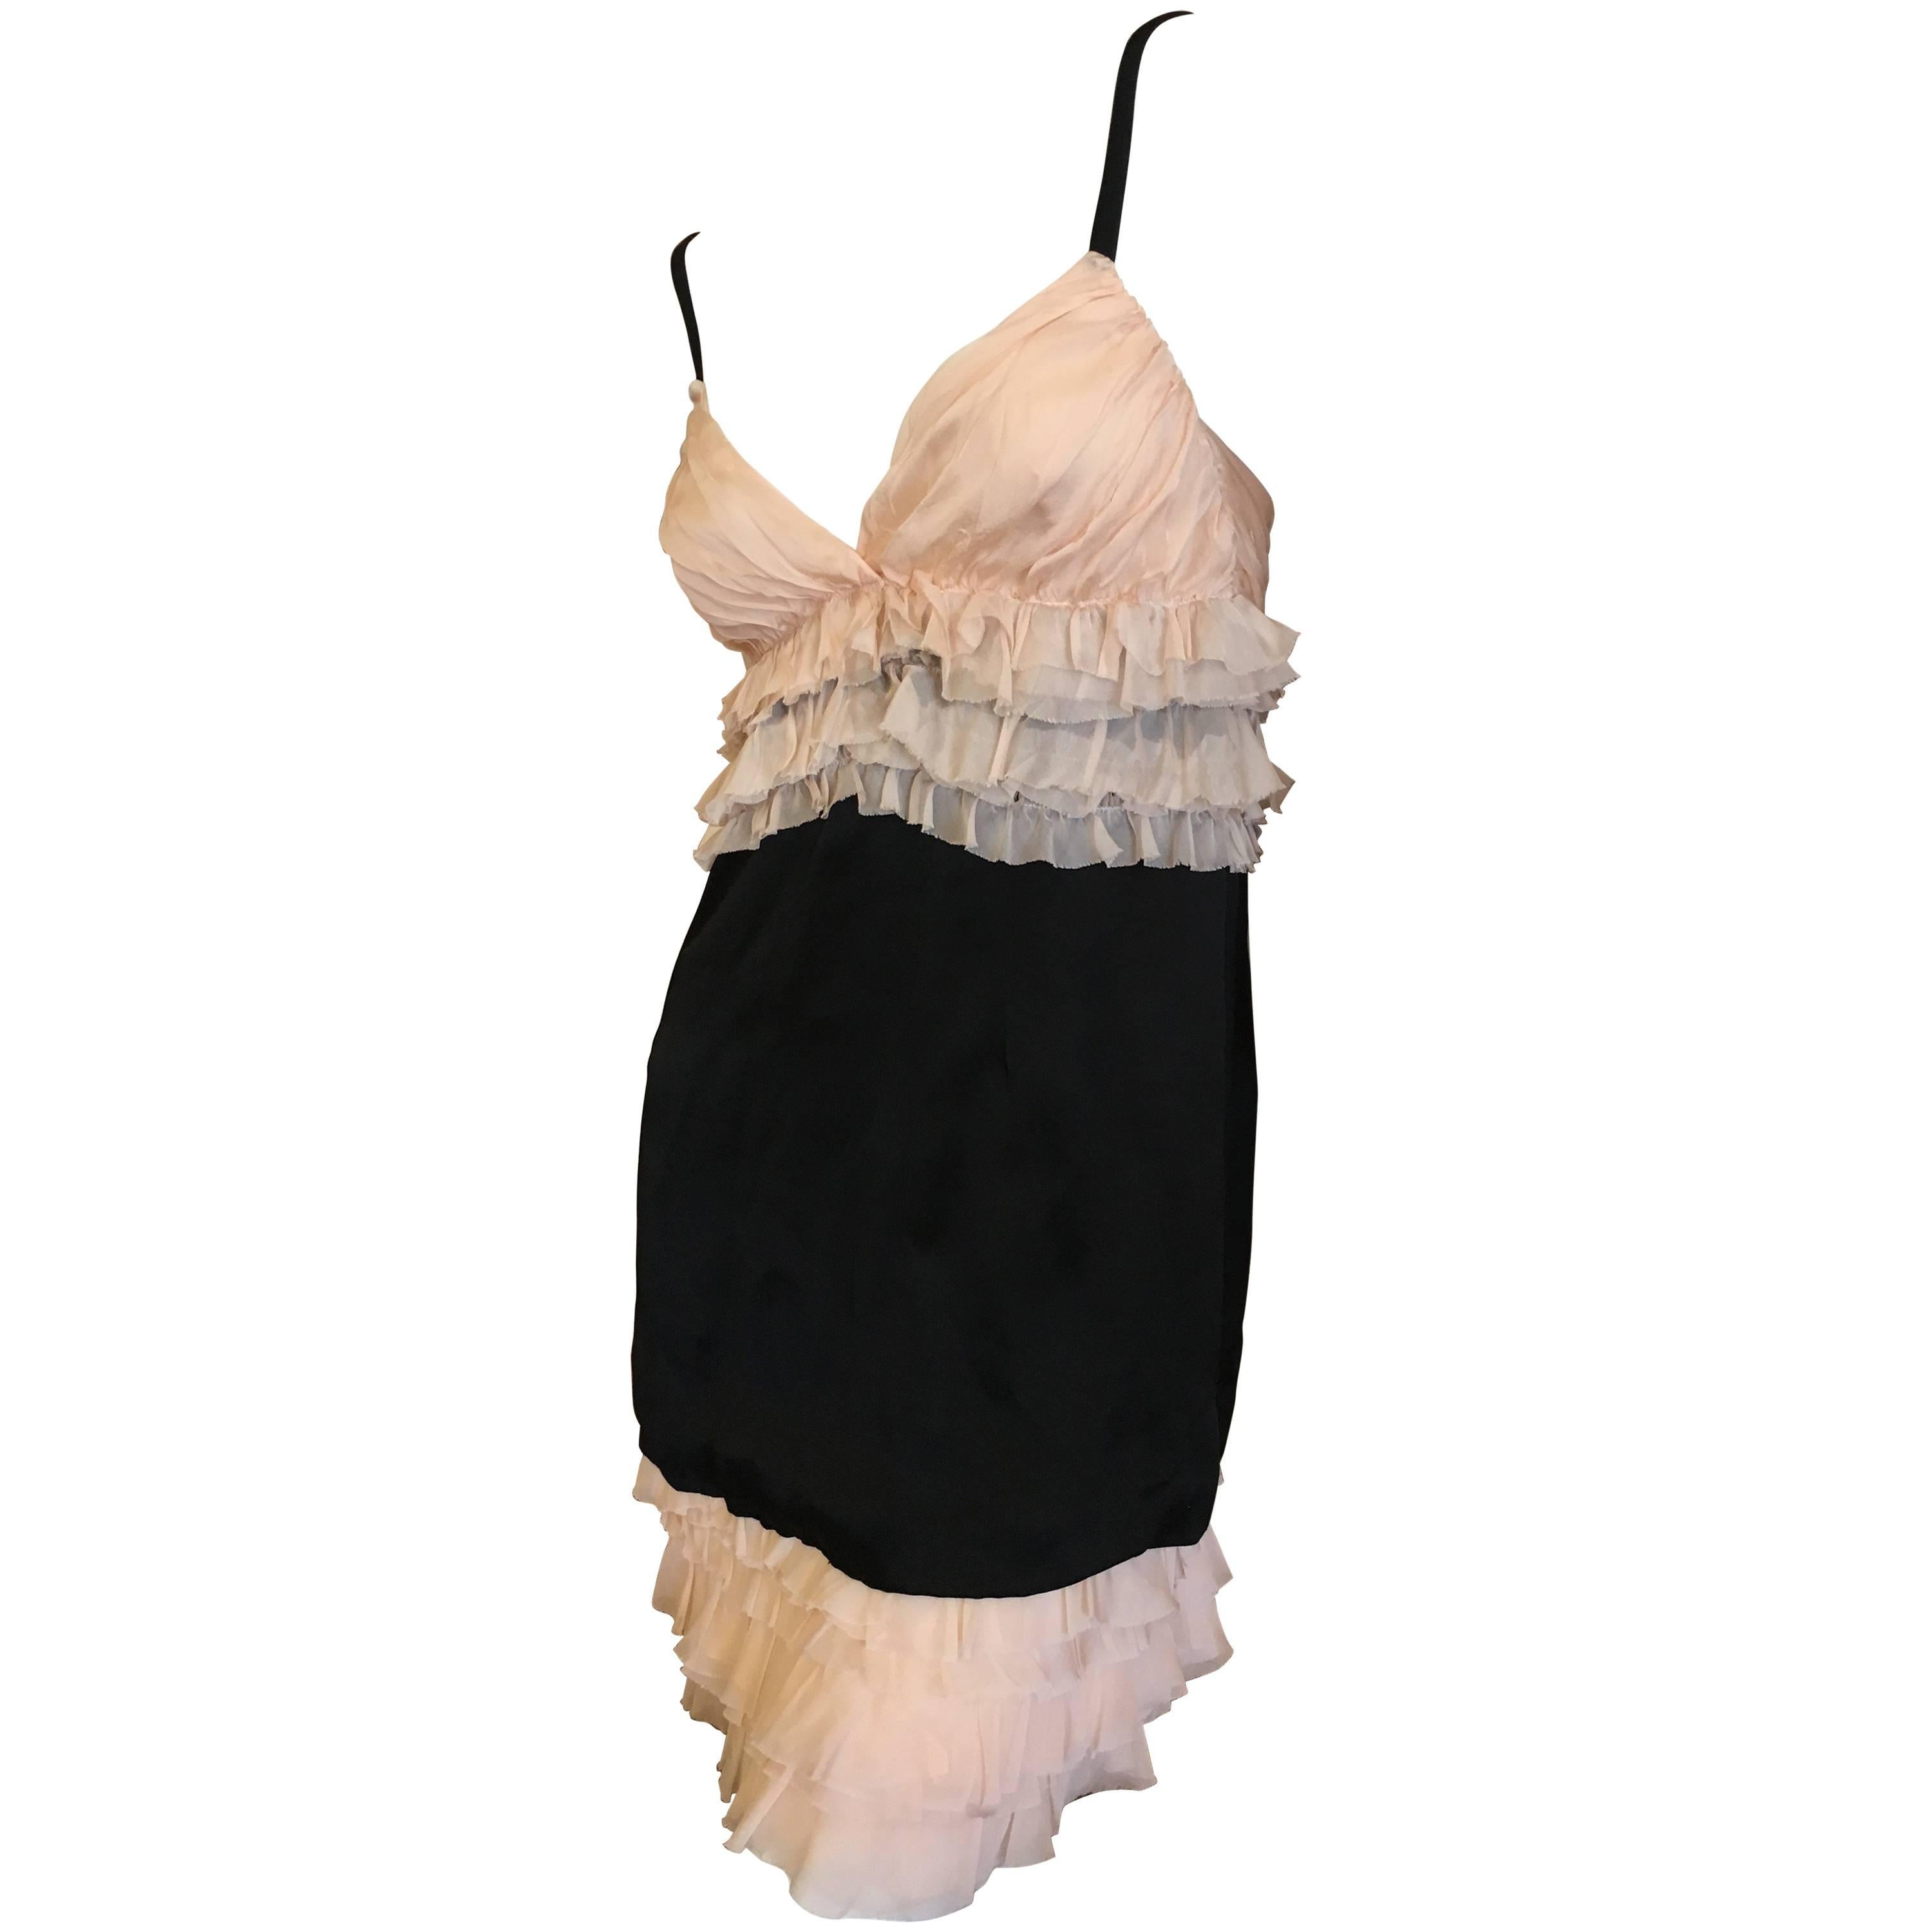 D&G Dolce & Gabbana Ruffle Black and Blush Mini Dress New with Tags For Sale